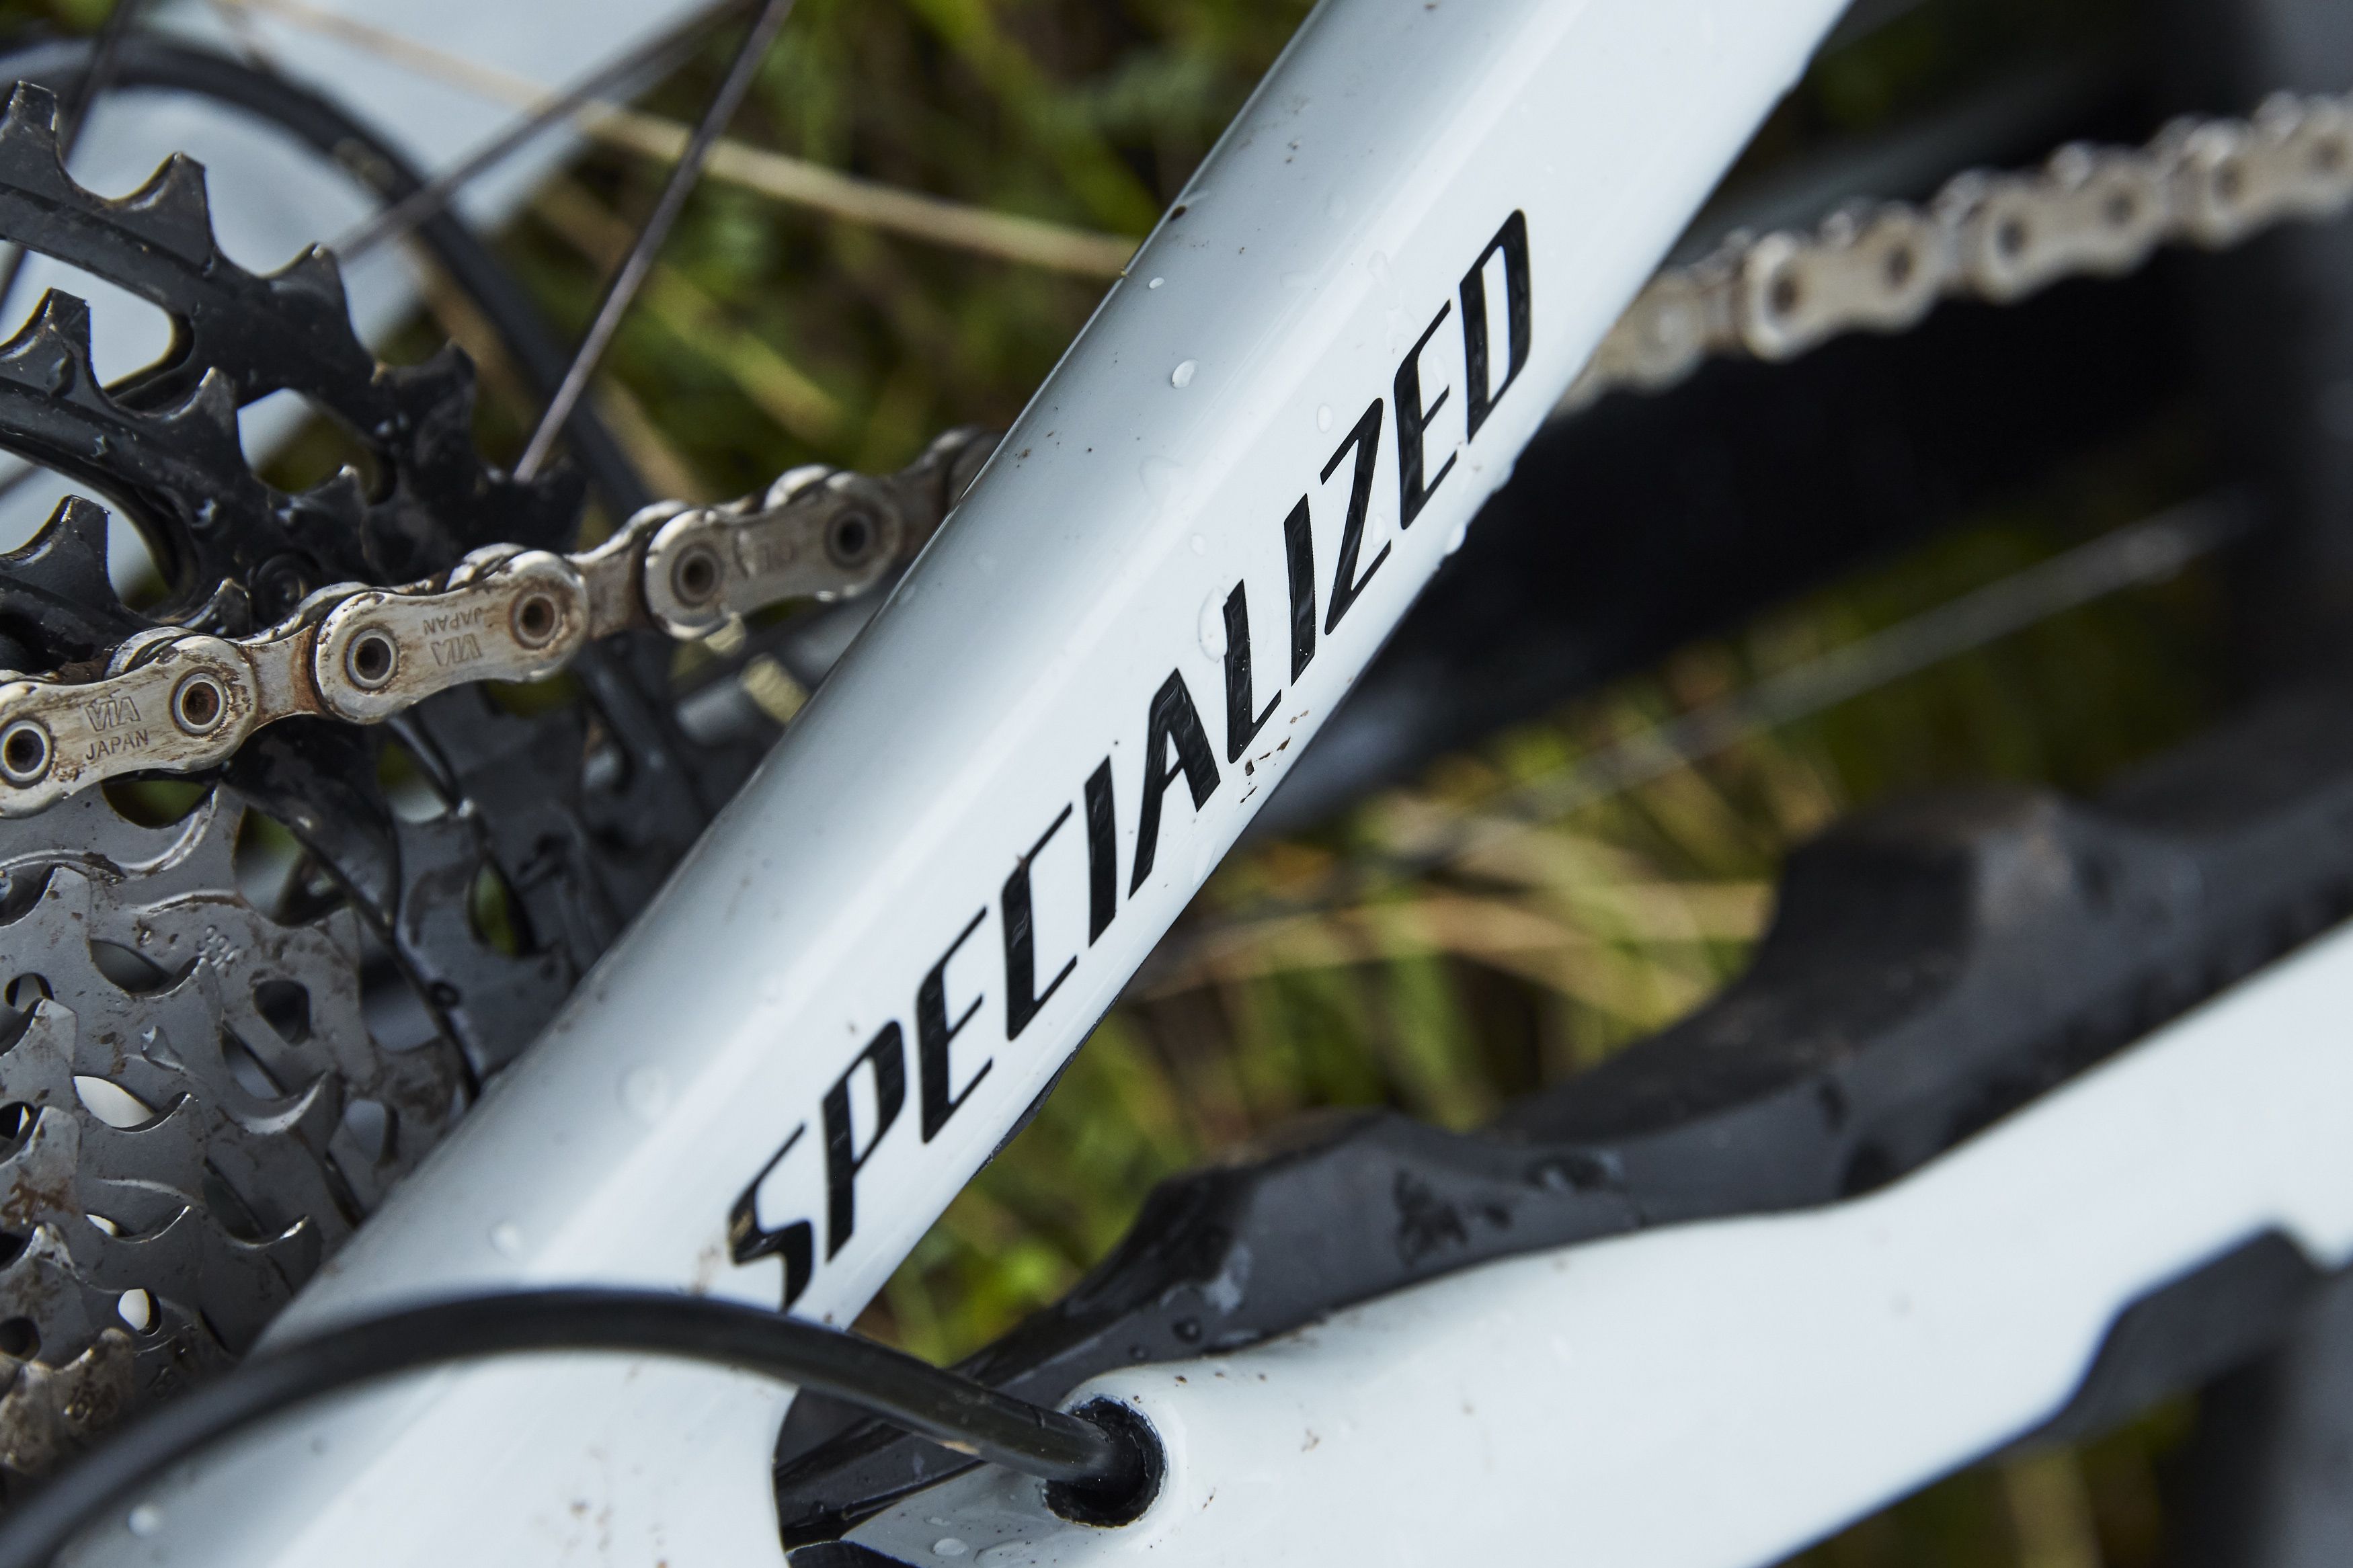 second hand specialized bikes for sale